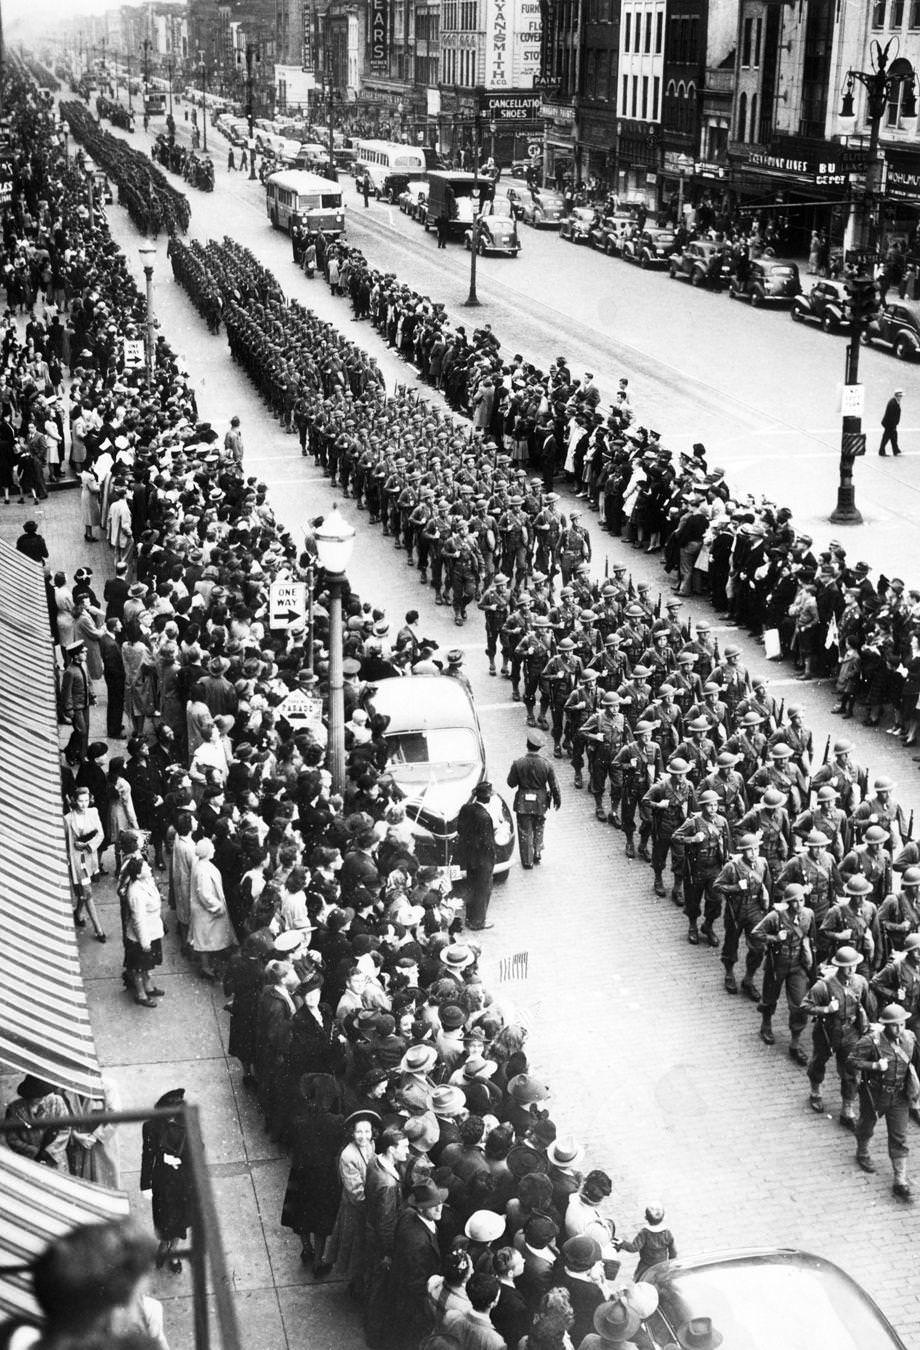 Richmond was the site of Virginia’s largest military parade since World War II began, with more than 6,000 uniformed men and women marching along Monument Avenue and Franklin, Belvidere and Broad streets, 1946.